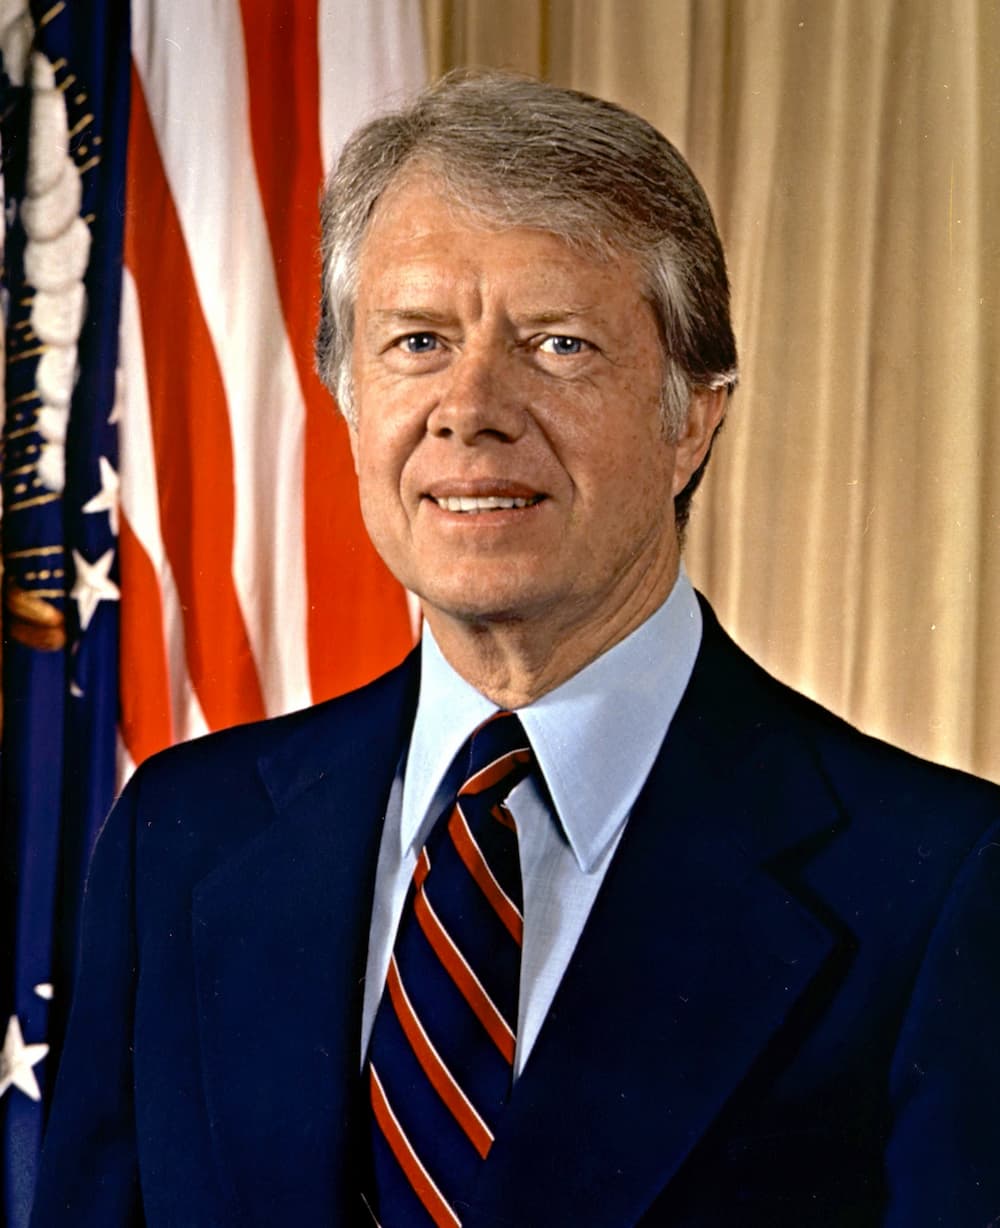 A portrait of a person in a blue suit in front of an American flag.